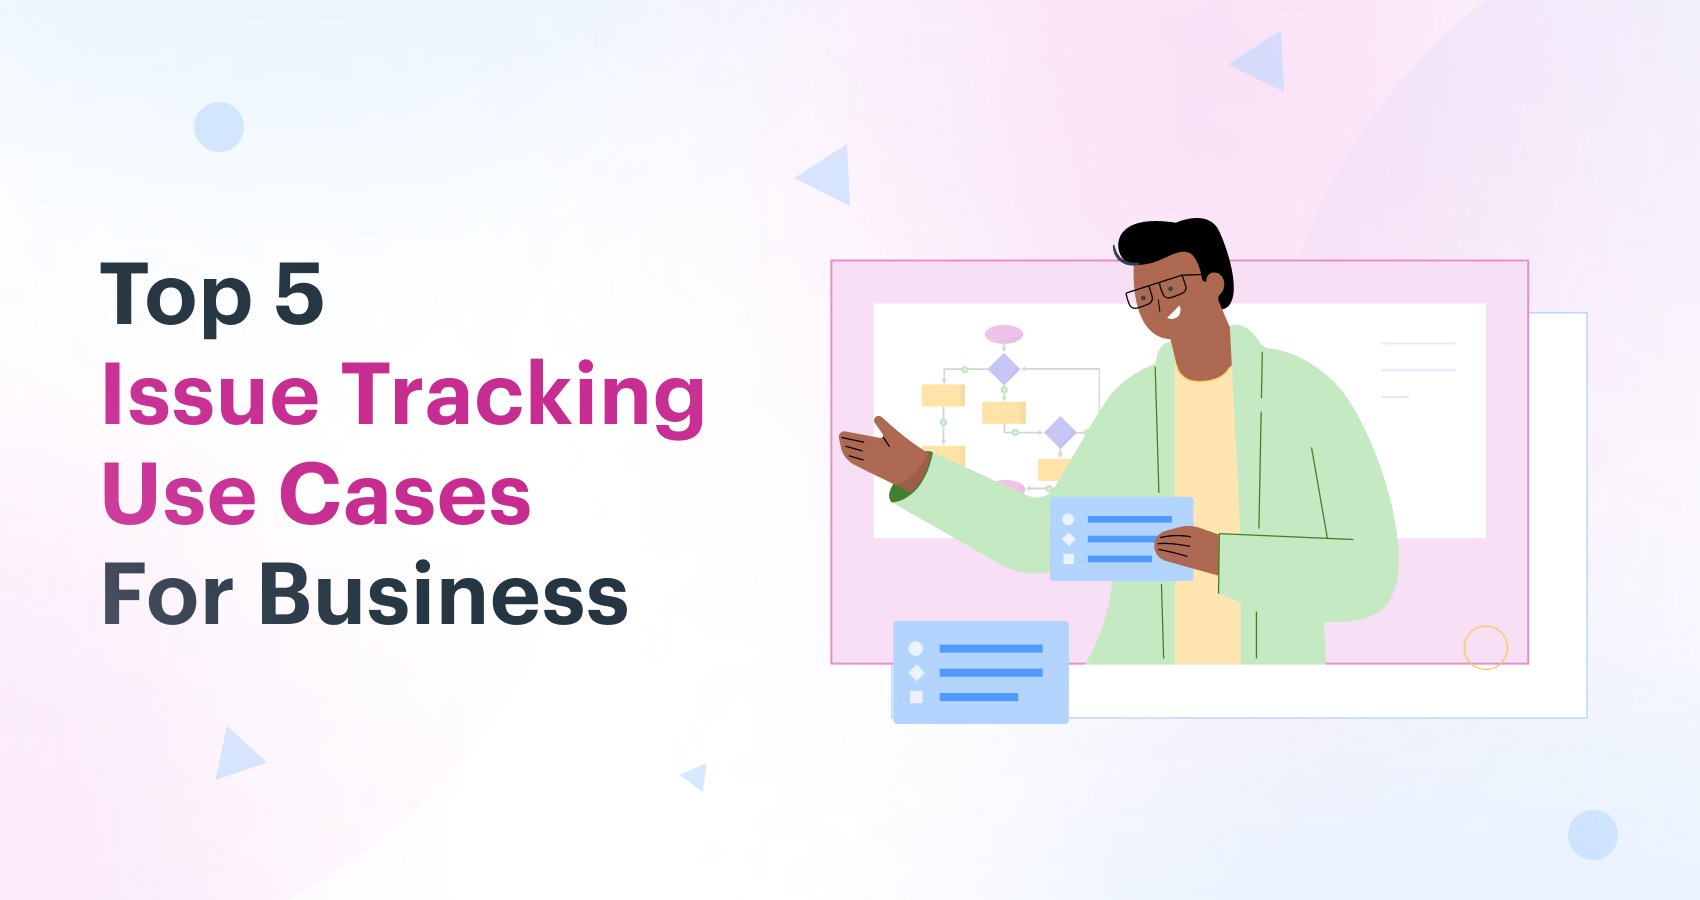 Top 5 Issue Tracking Use Cases for Business